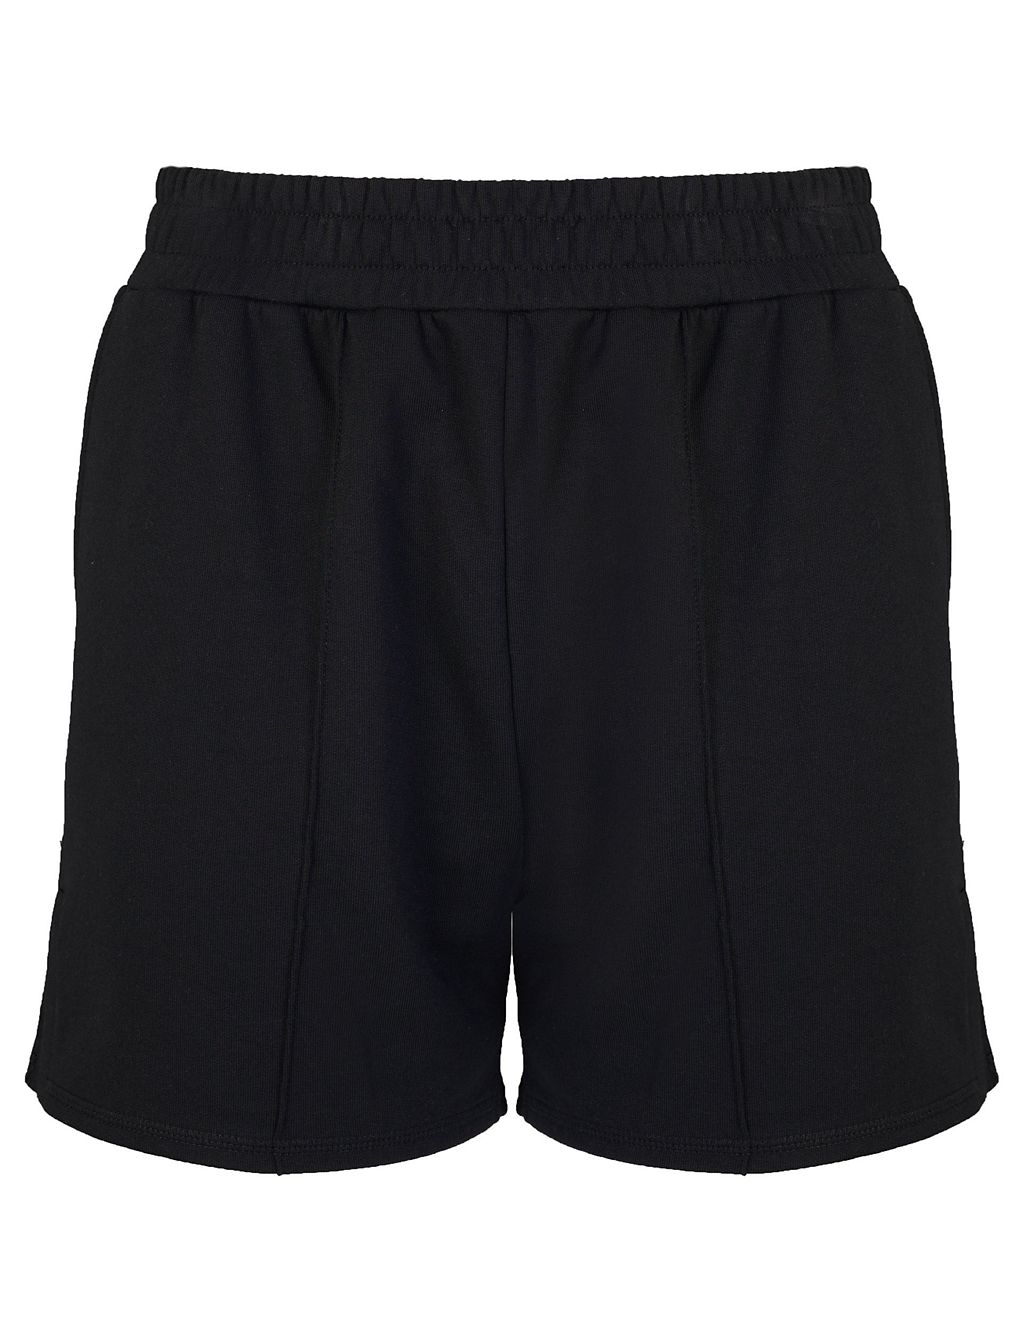 After Class Cotton Modal High Waisted Shorts 1 of 6